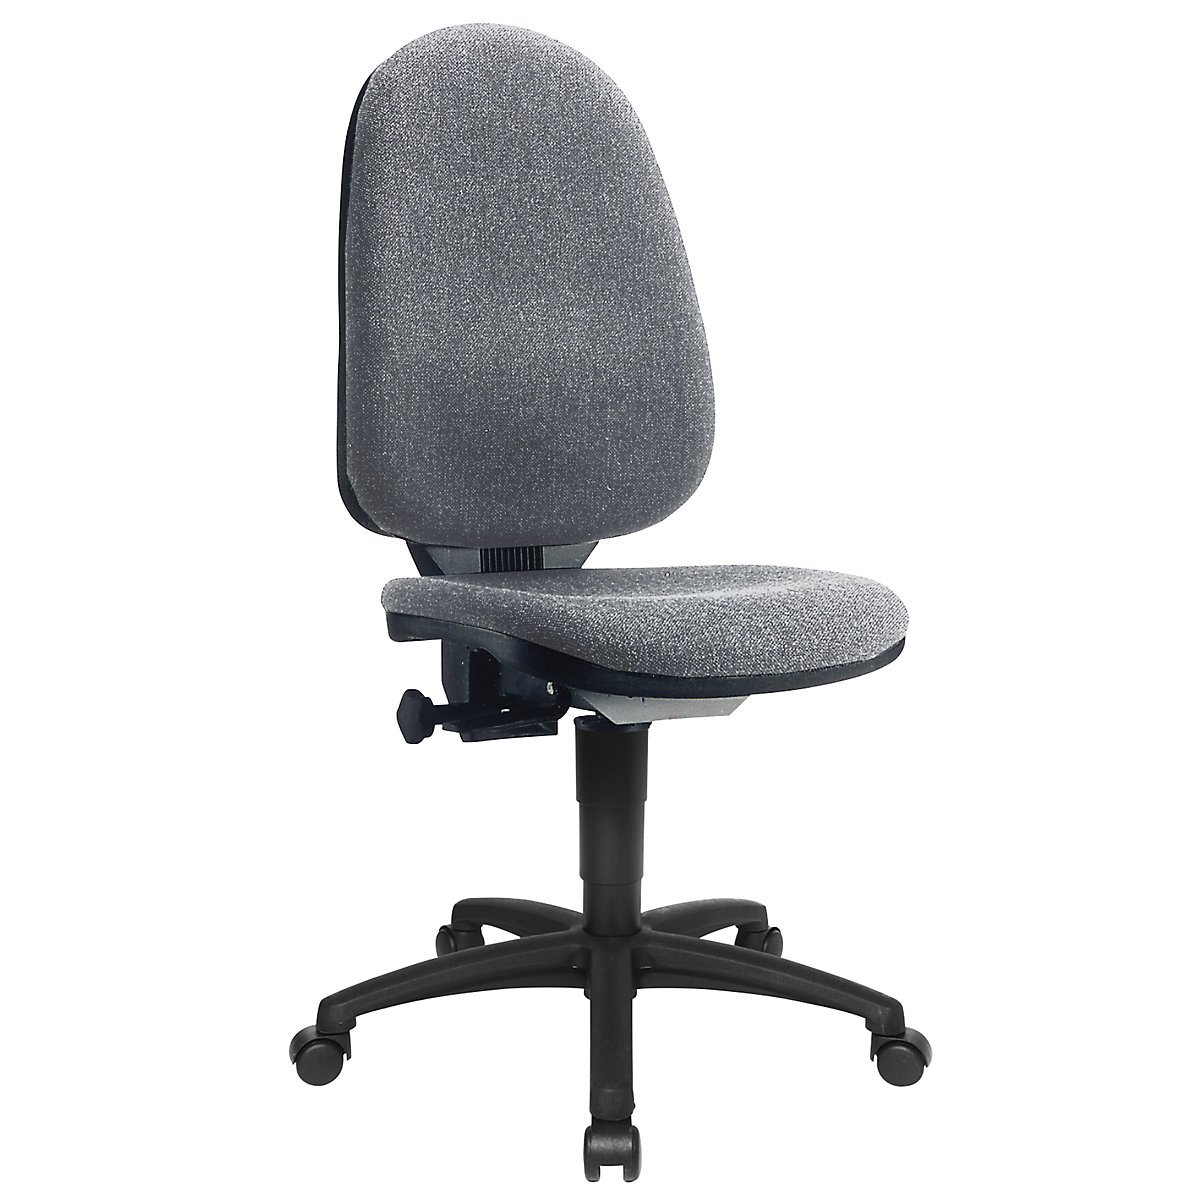 Standard swivel chair – Topstar, without arm rests, back rest 550 mm, frame black, fabric grey, 2+-4